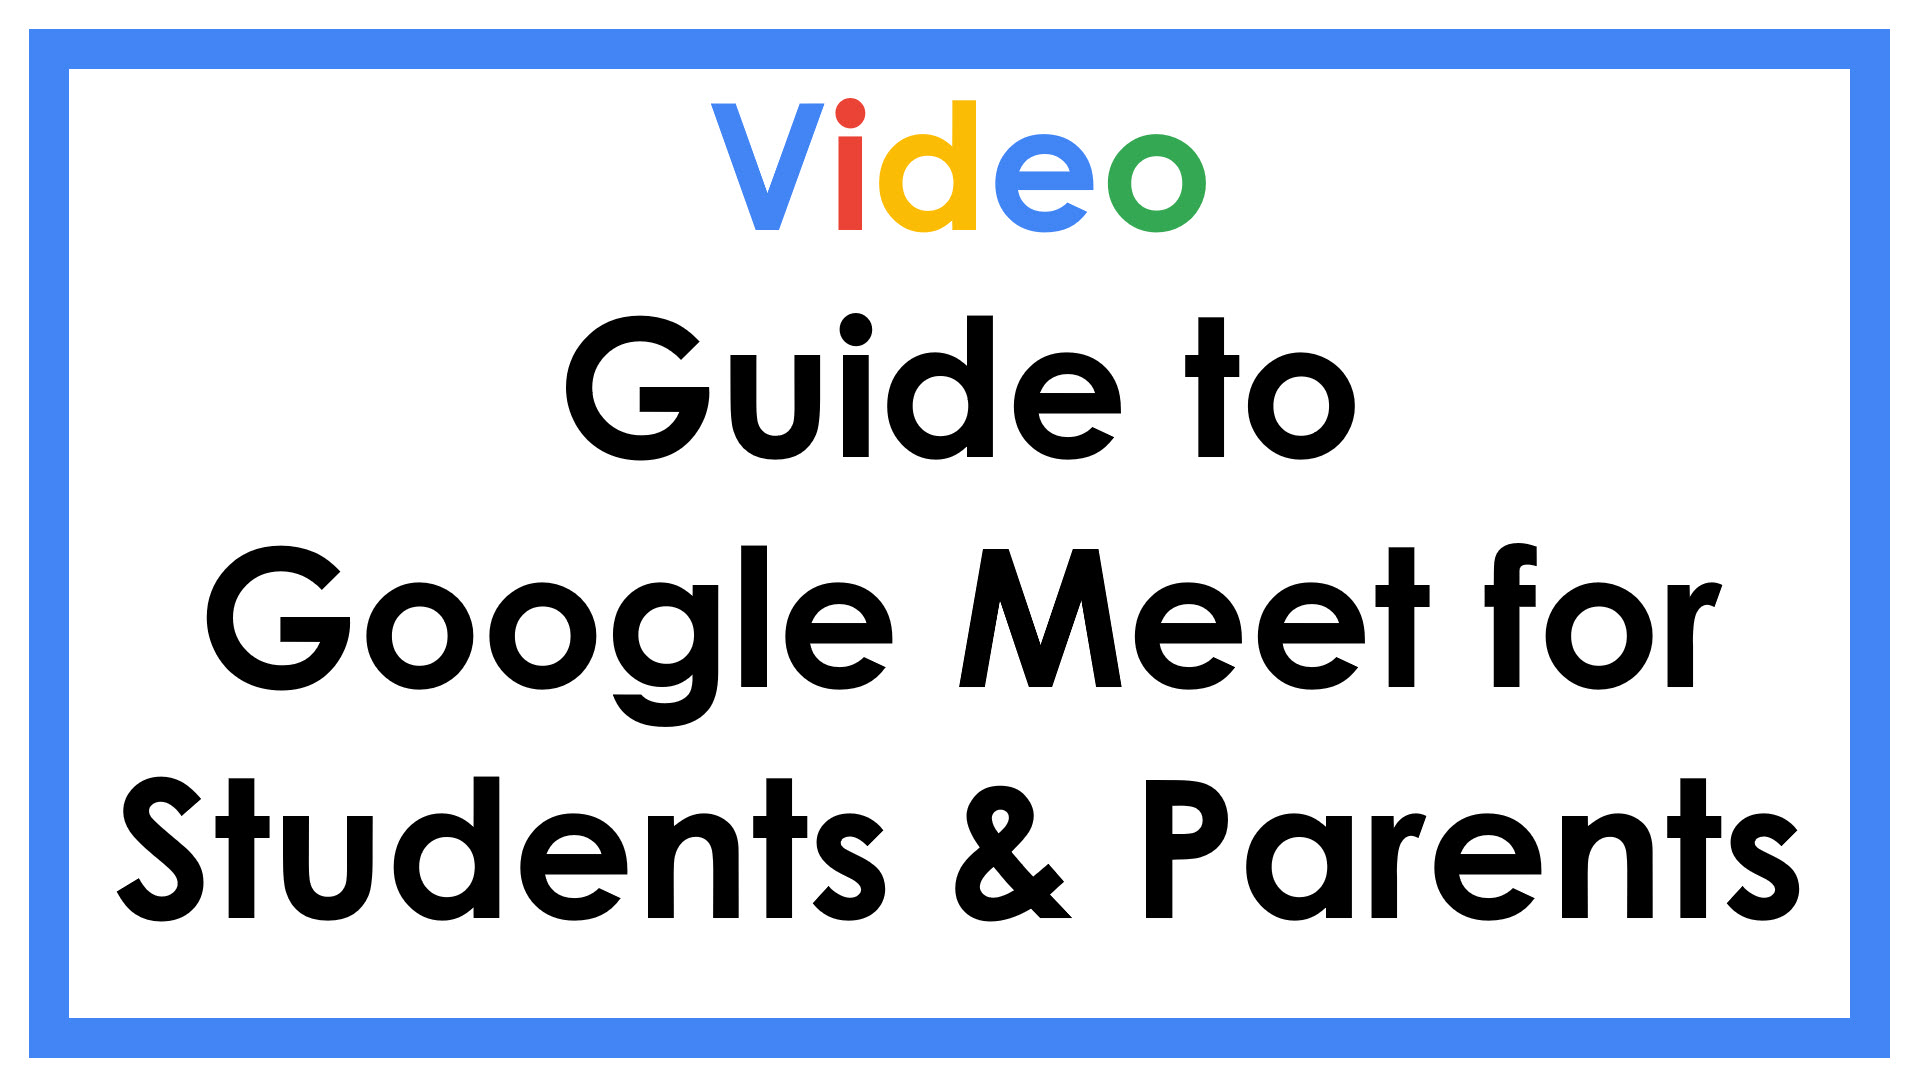 Guide to Google Meet for Students & Parents